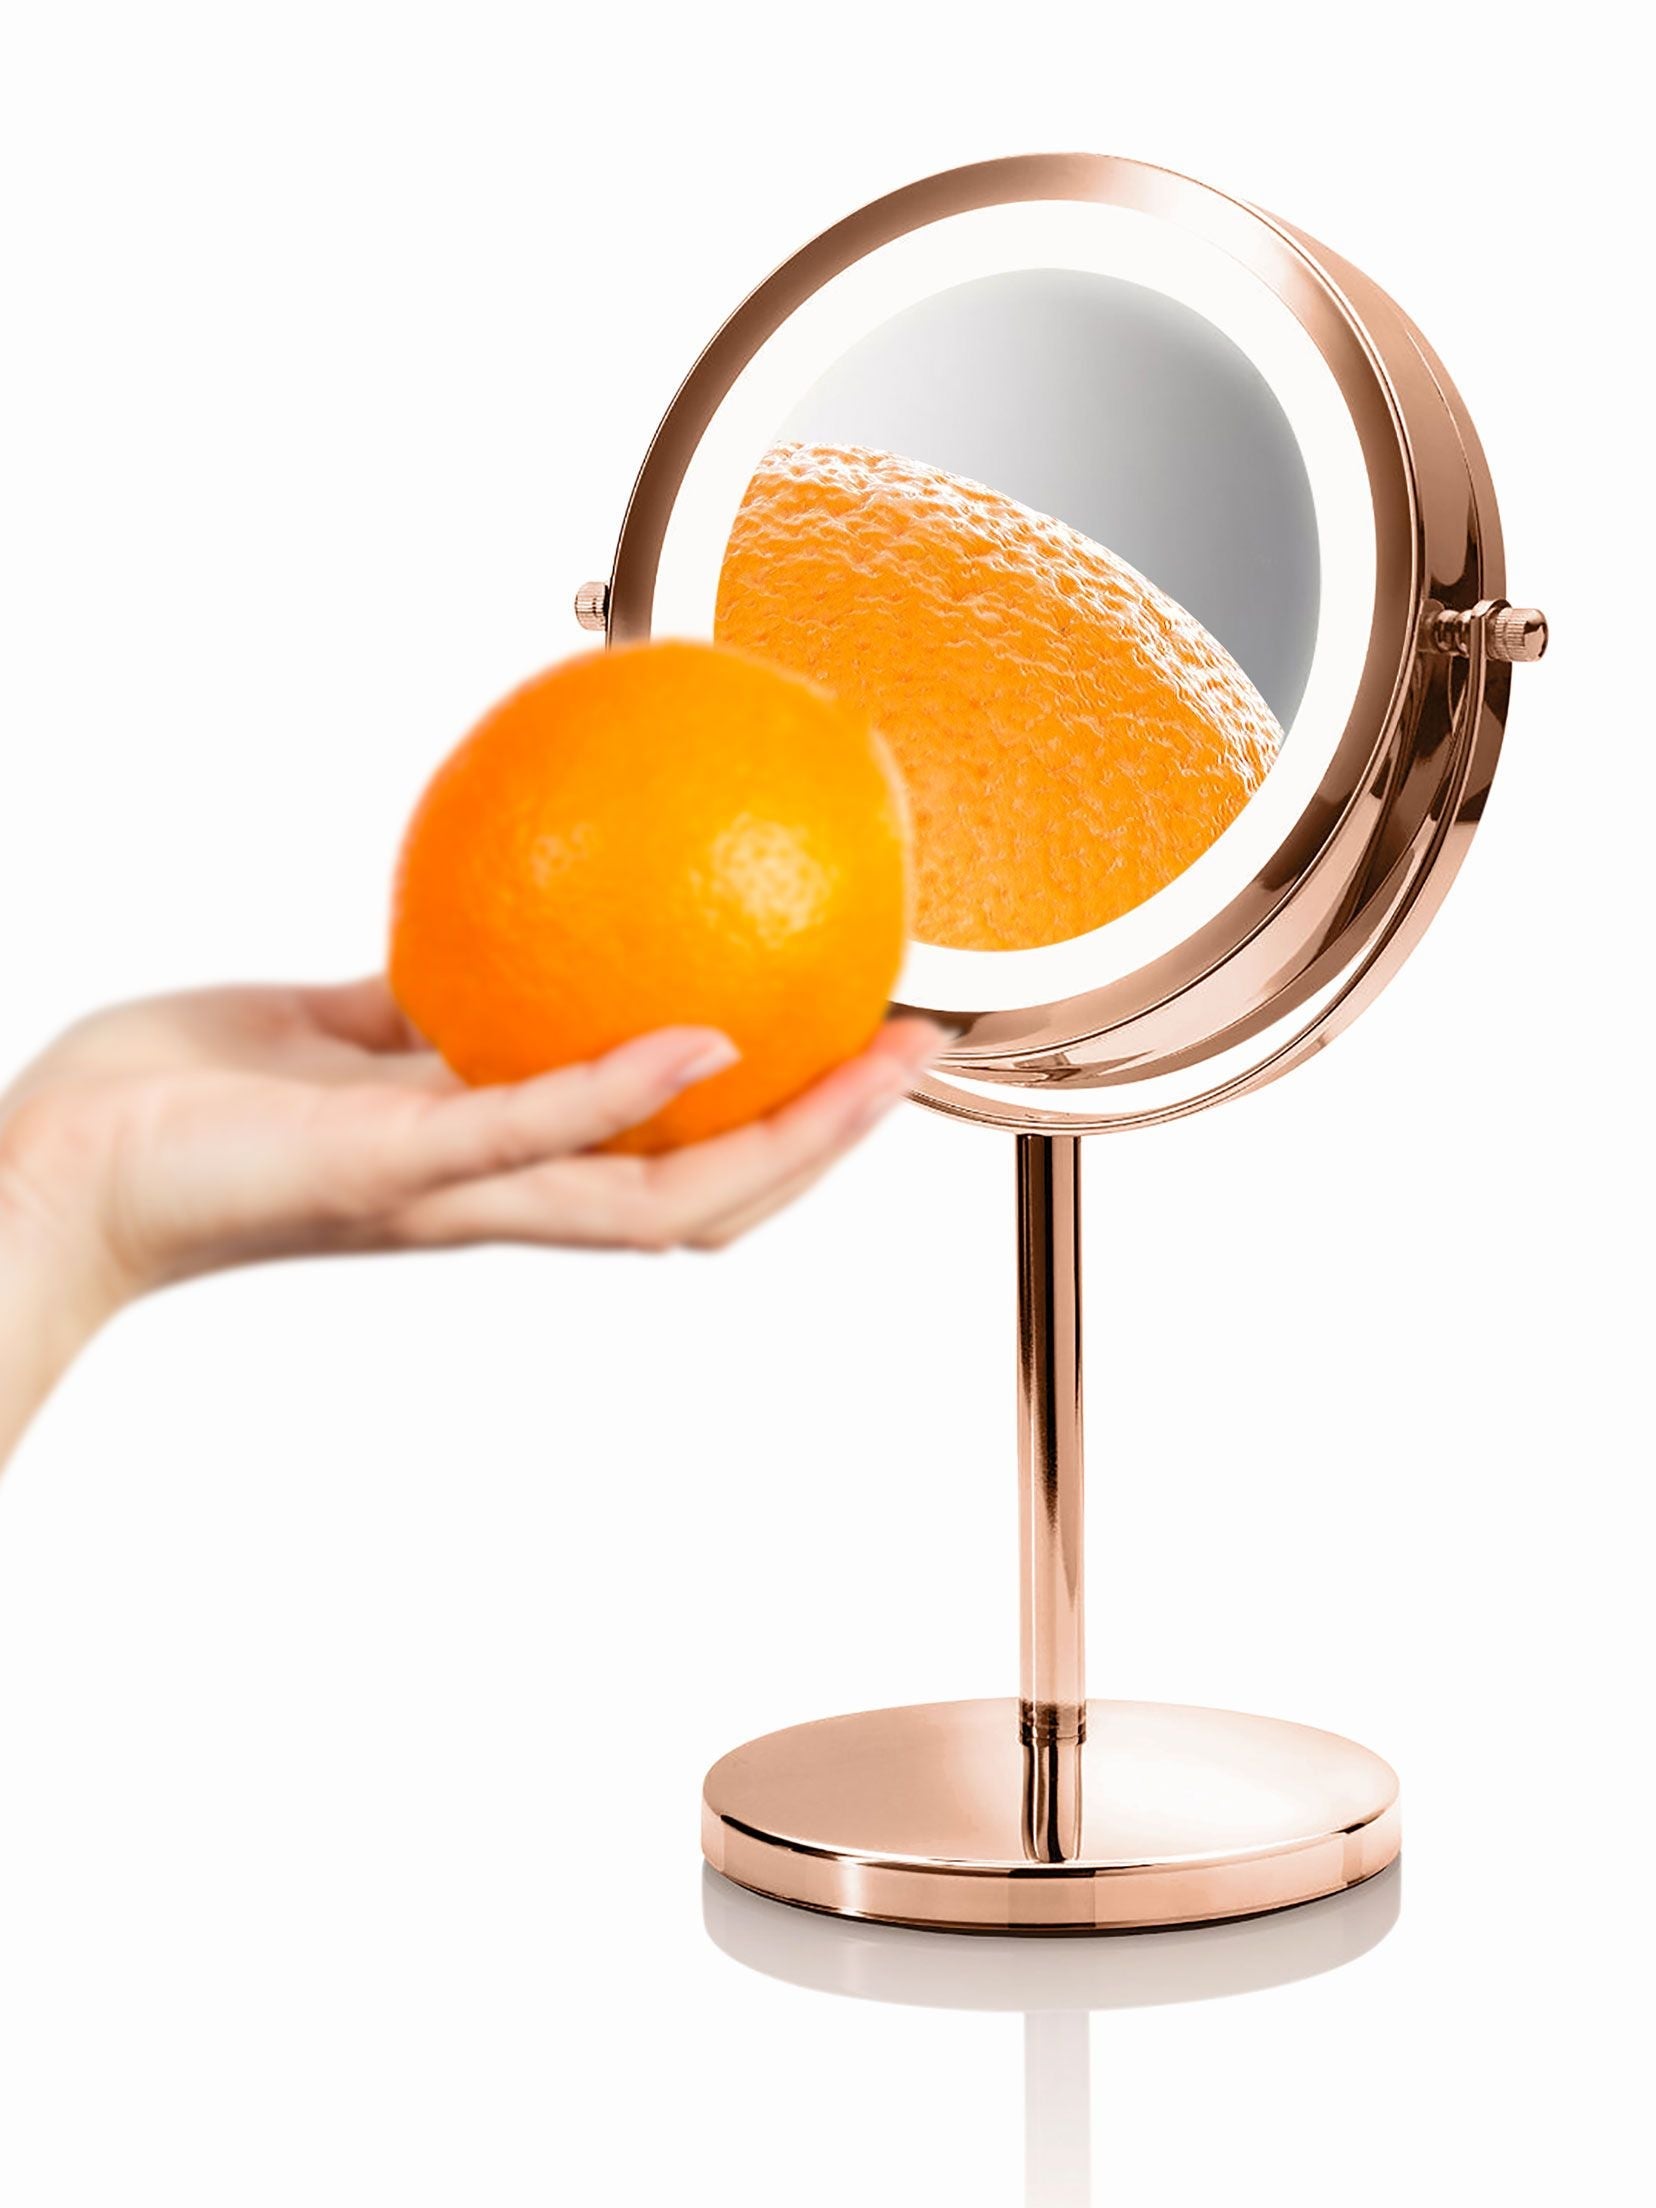 rose gold double sided cosmetic mirror with orange held in front of it with magnified reflection of orange peel